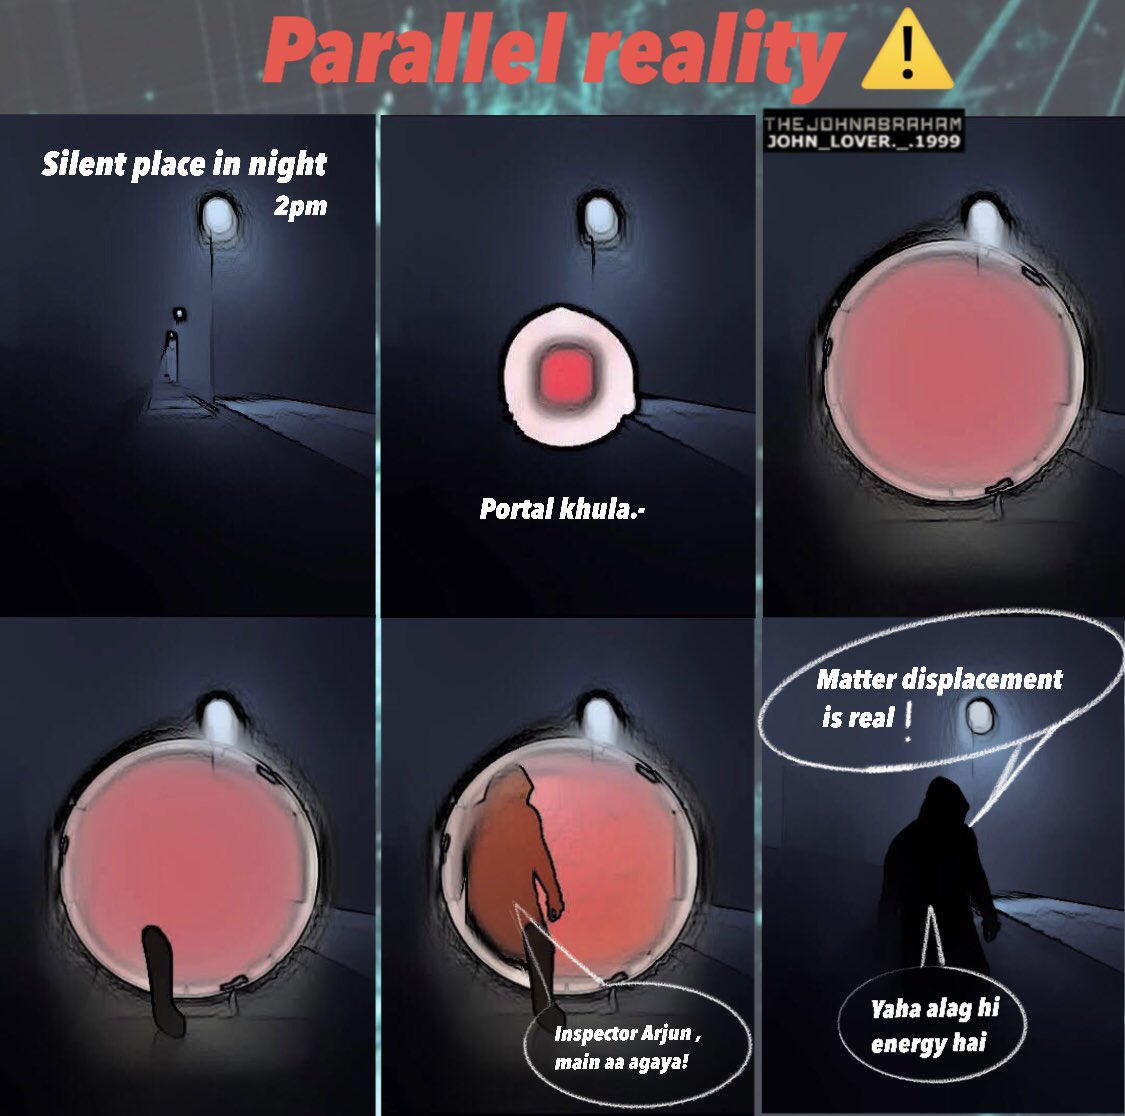 #ParallelReality⚠️
Episode 1 
@TheJohnAbraham